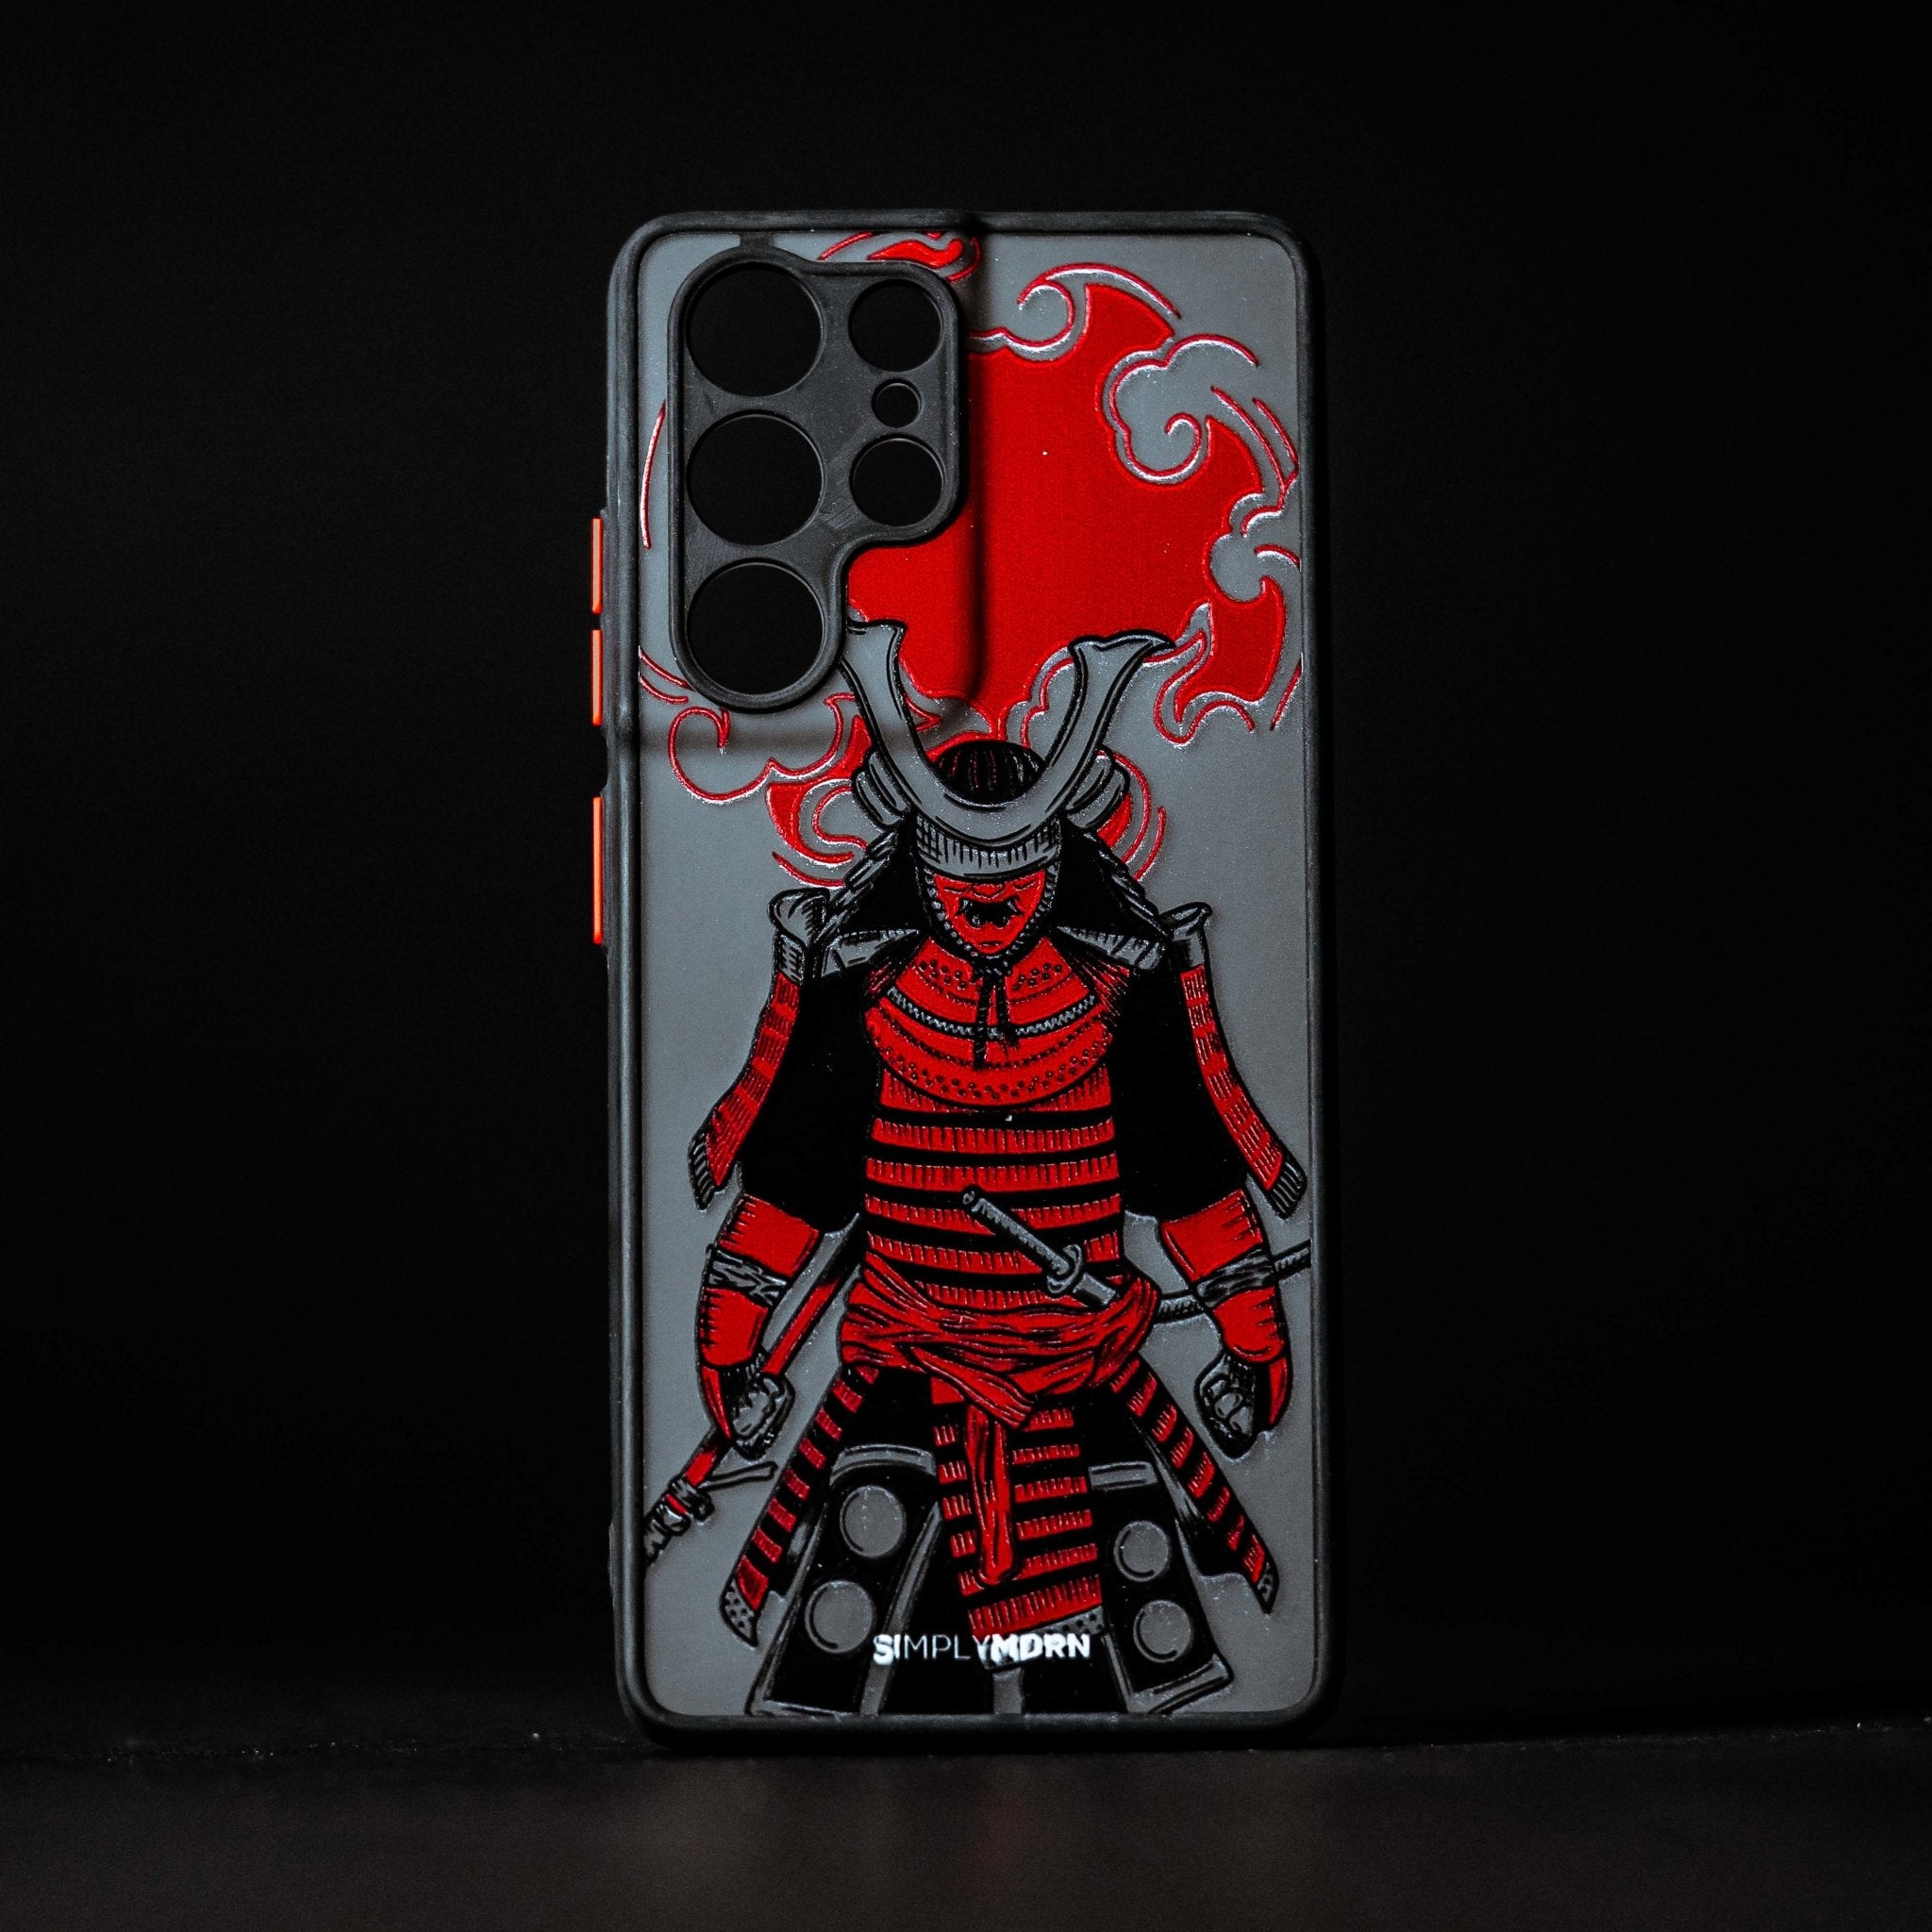 SINISTER Tough Android Case